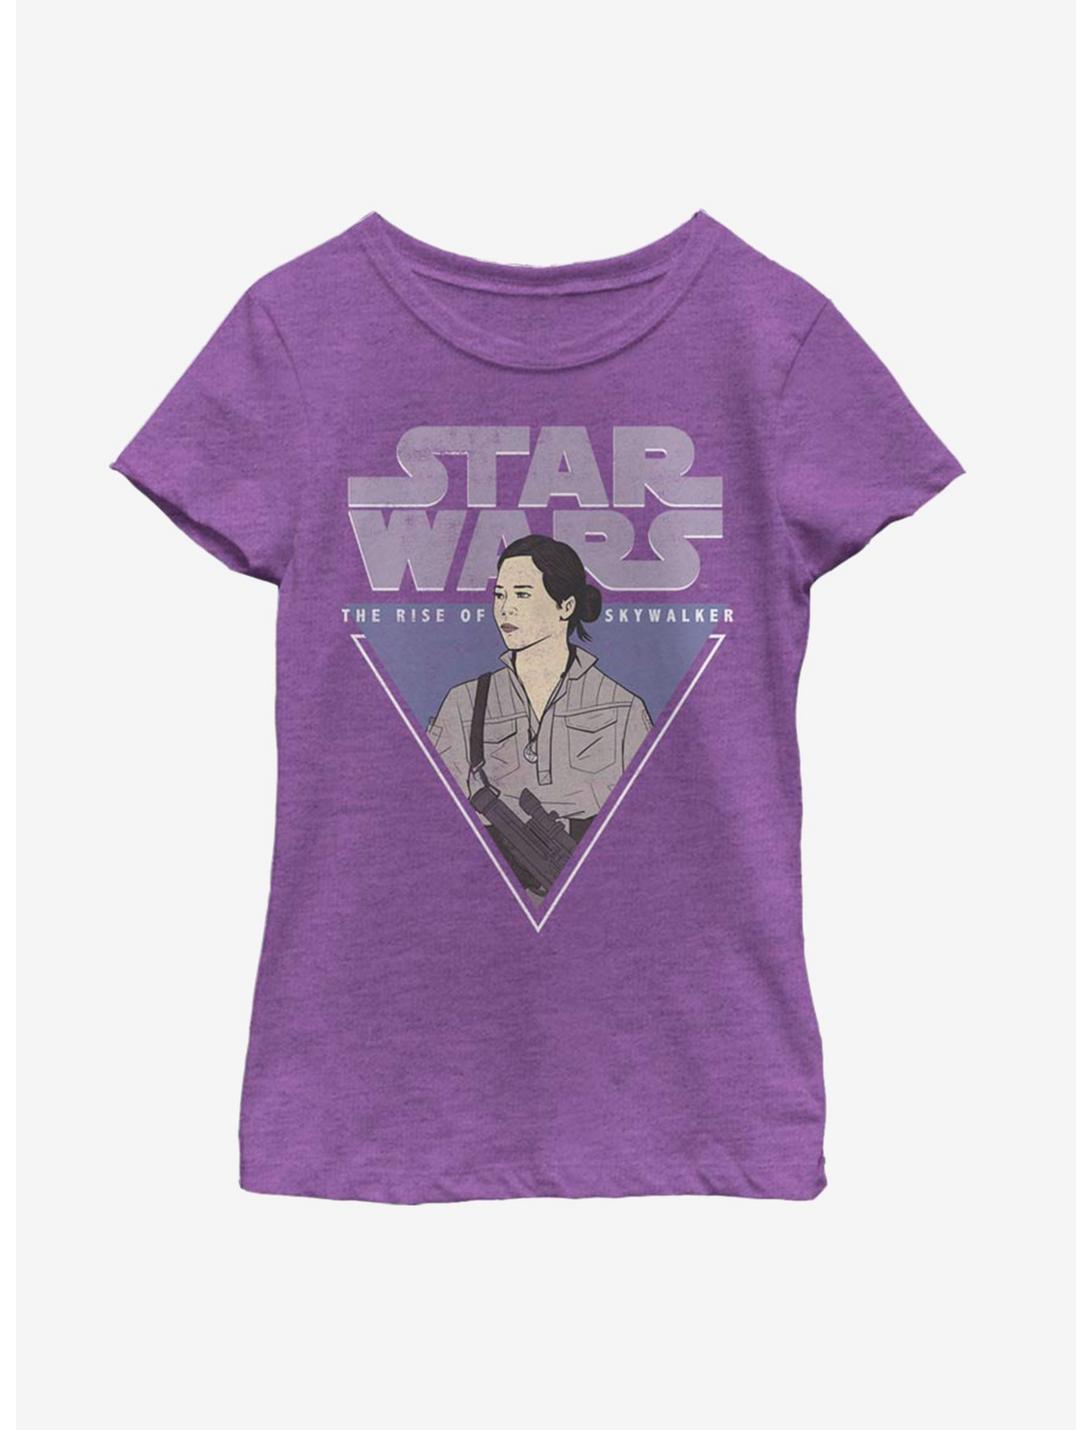 Star Wars Rose Triangle Youth Girls T-Shirt, PURPLE BERRY, hi-res